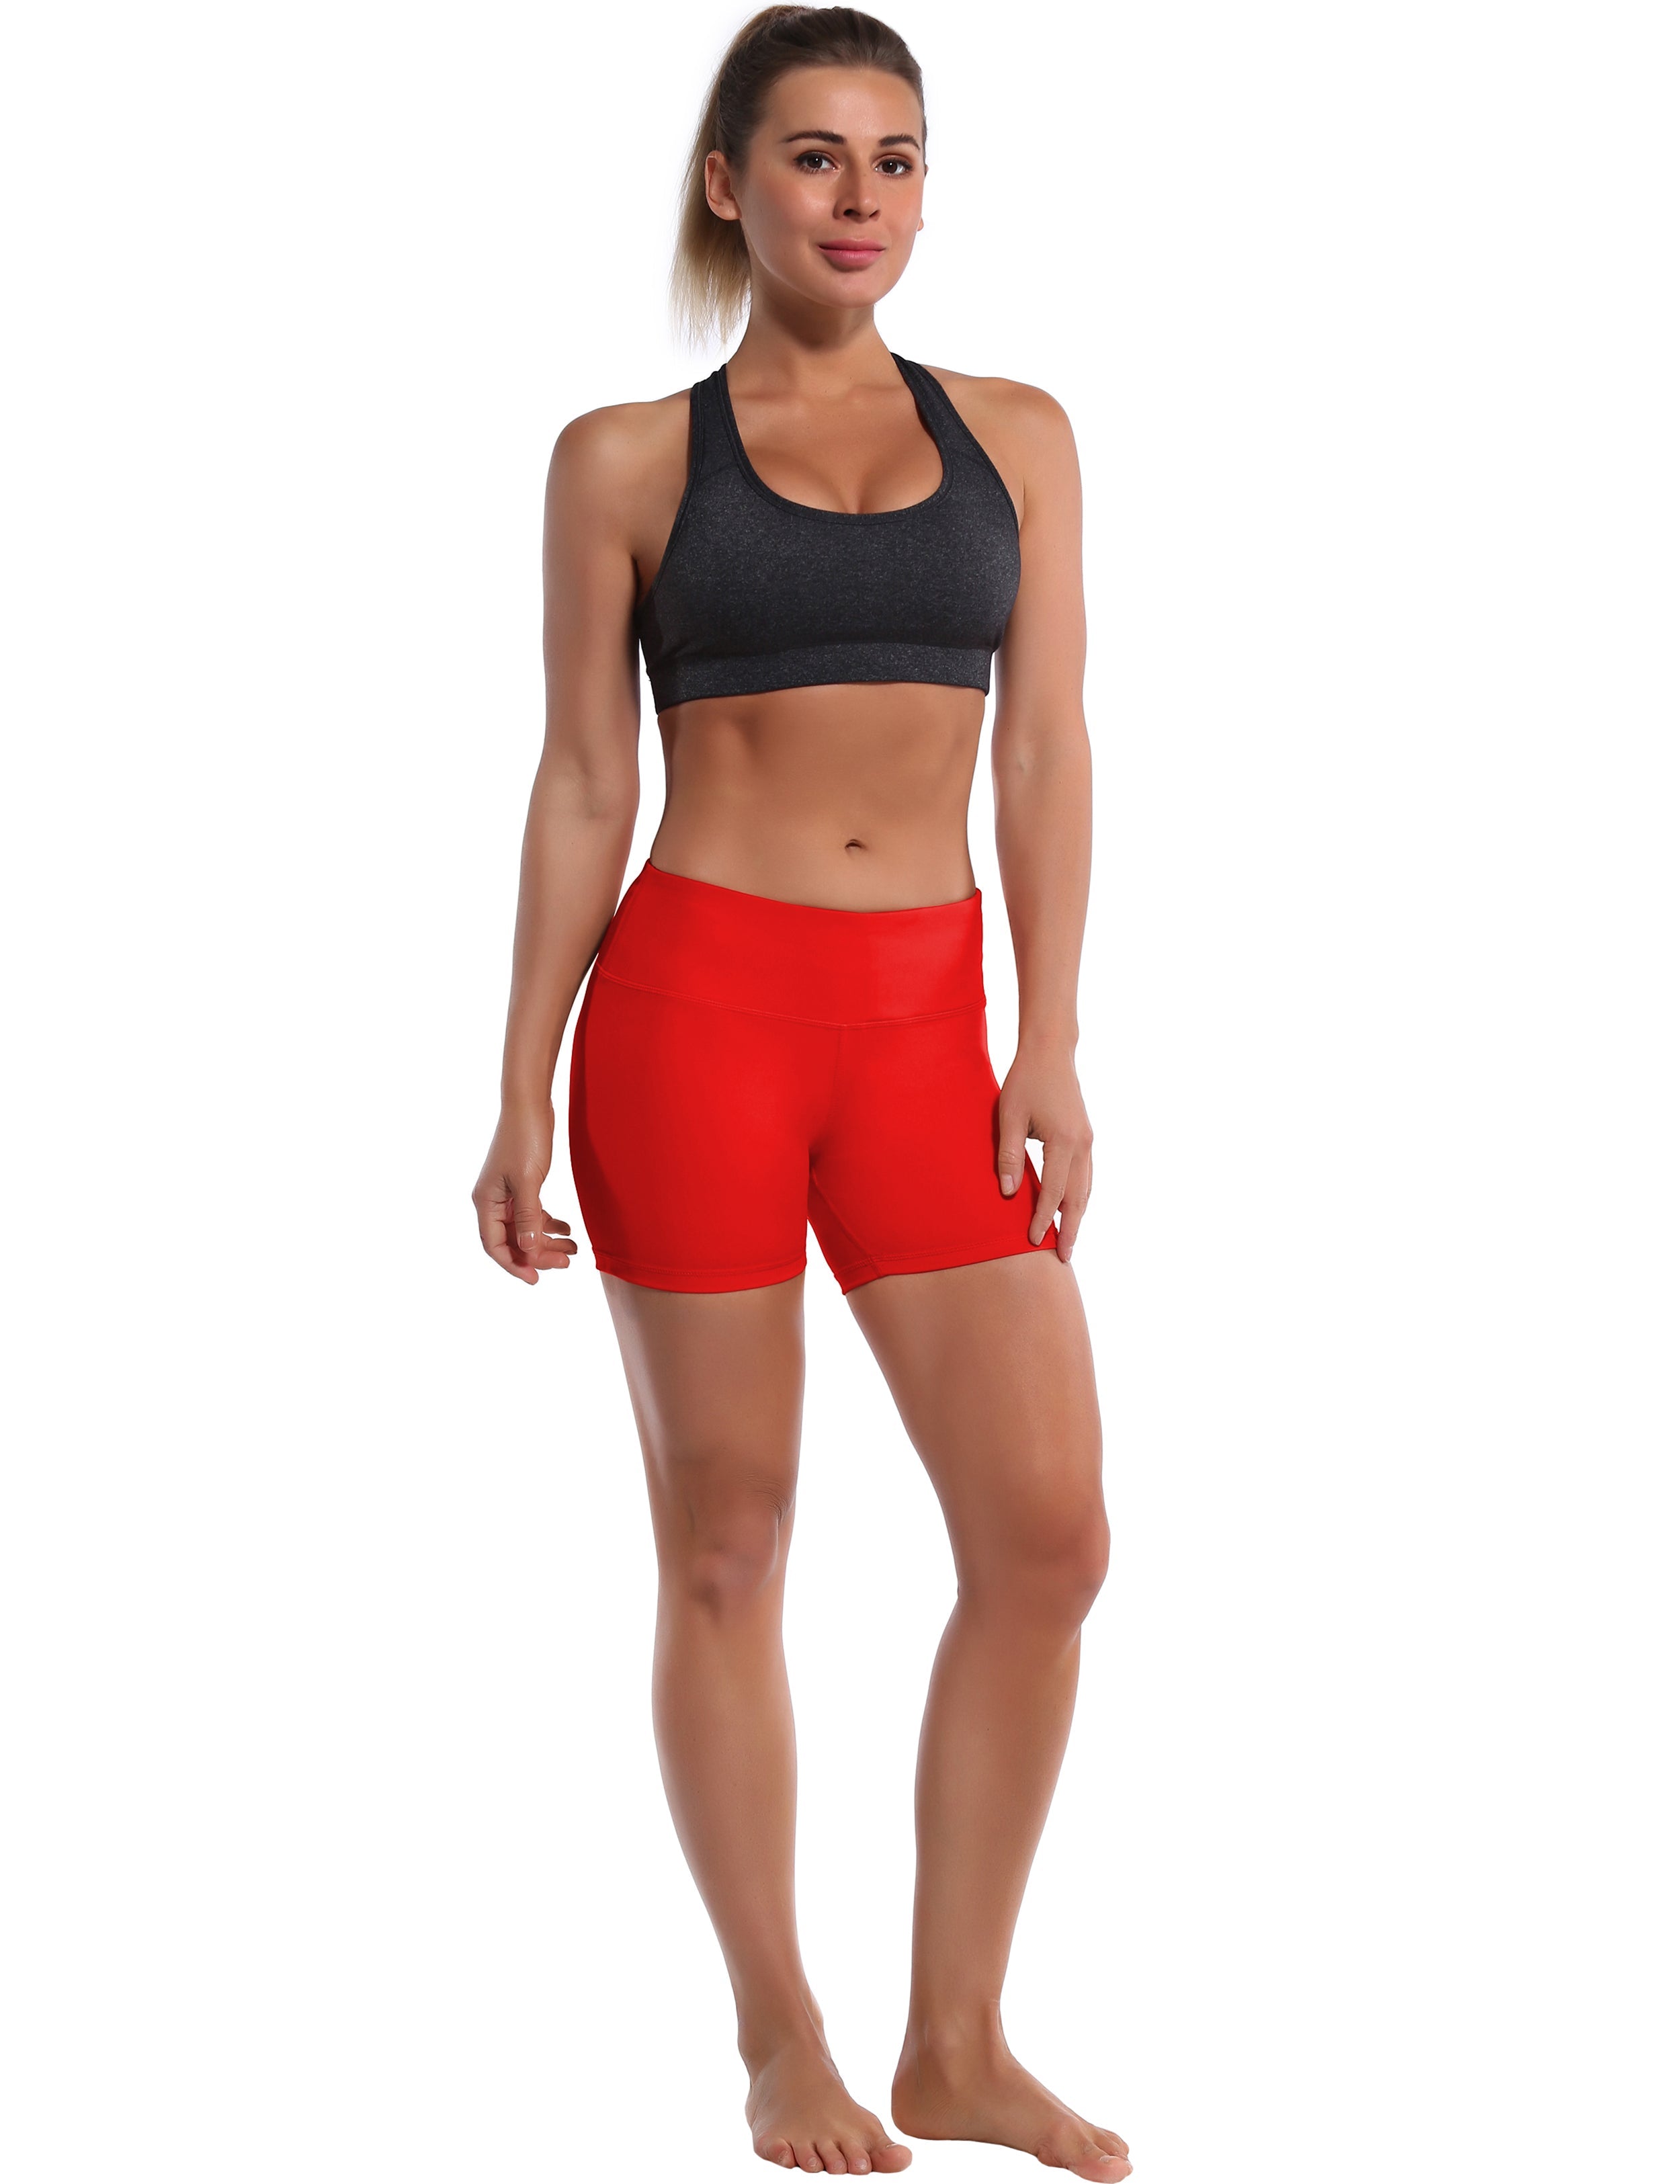 4" Golf Shorts scarlet Sleek, soft, smooth and totally comfortable: our newest style is here. Softest-ever fabric High elasticity High density 4-way stretch Fabric doesn't attract lint easily No see-through Moisture-wicking Machine wash 75% Nylon, 25% Spandex